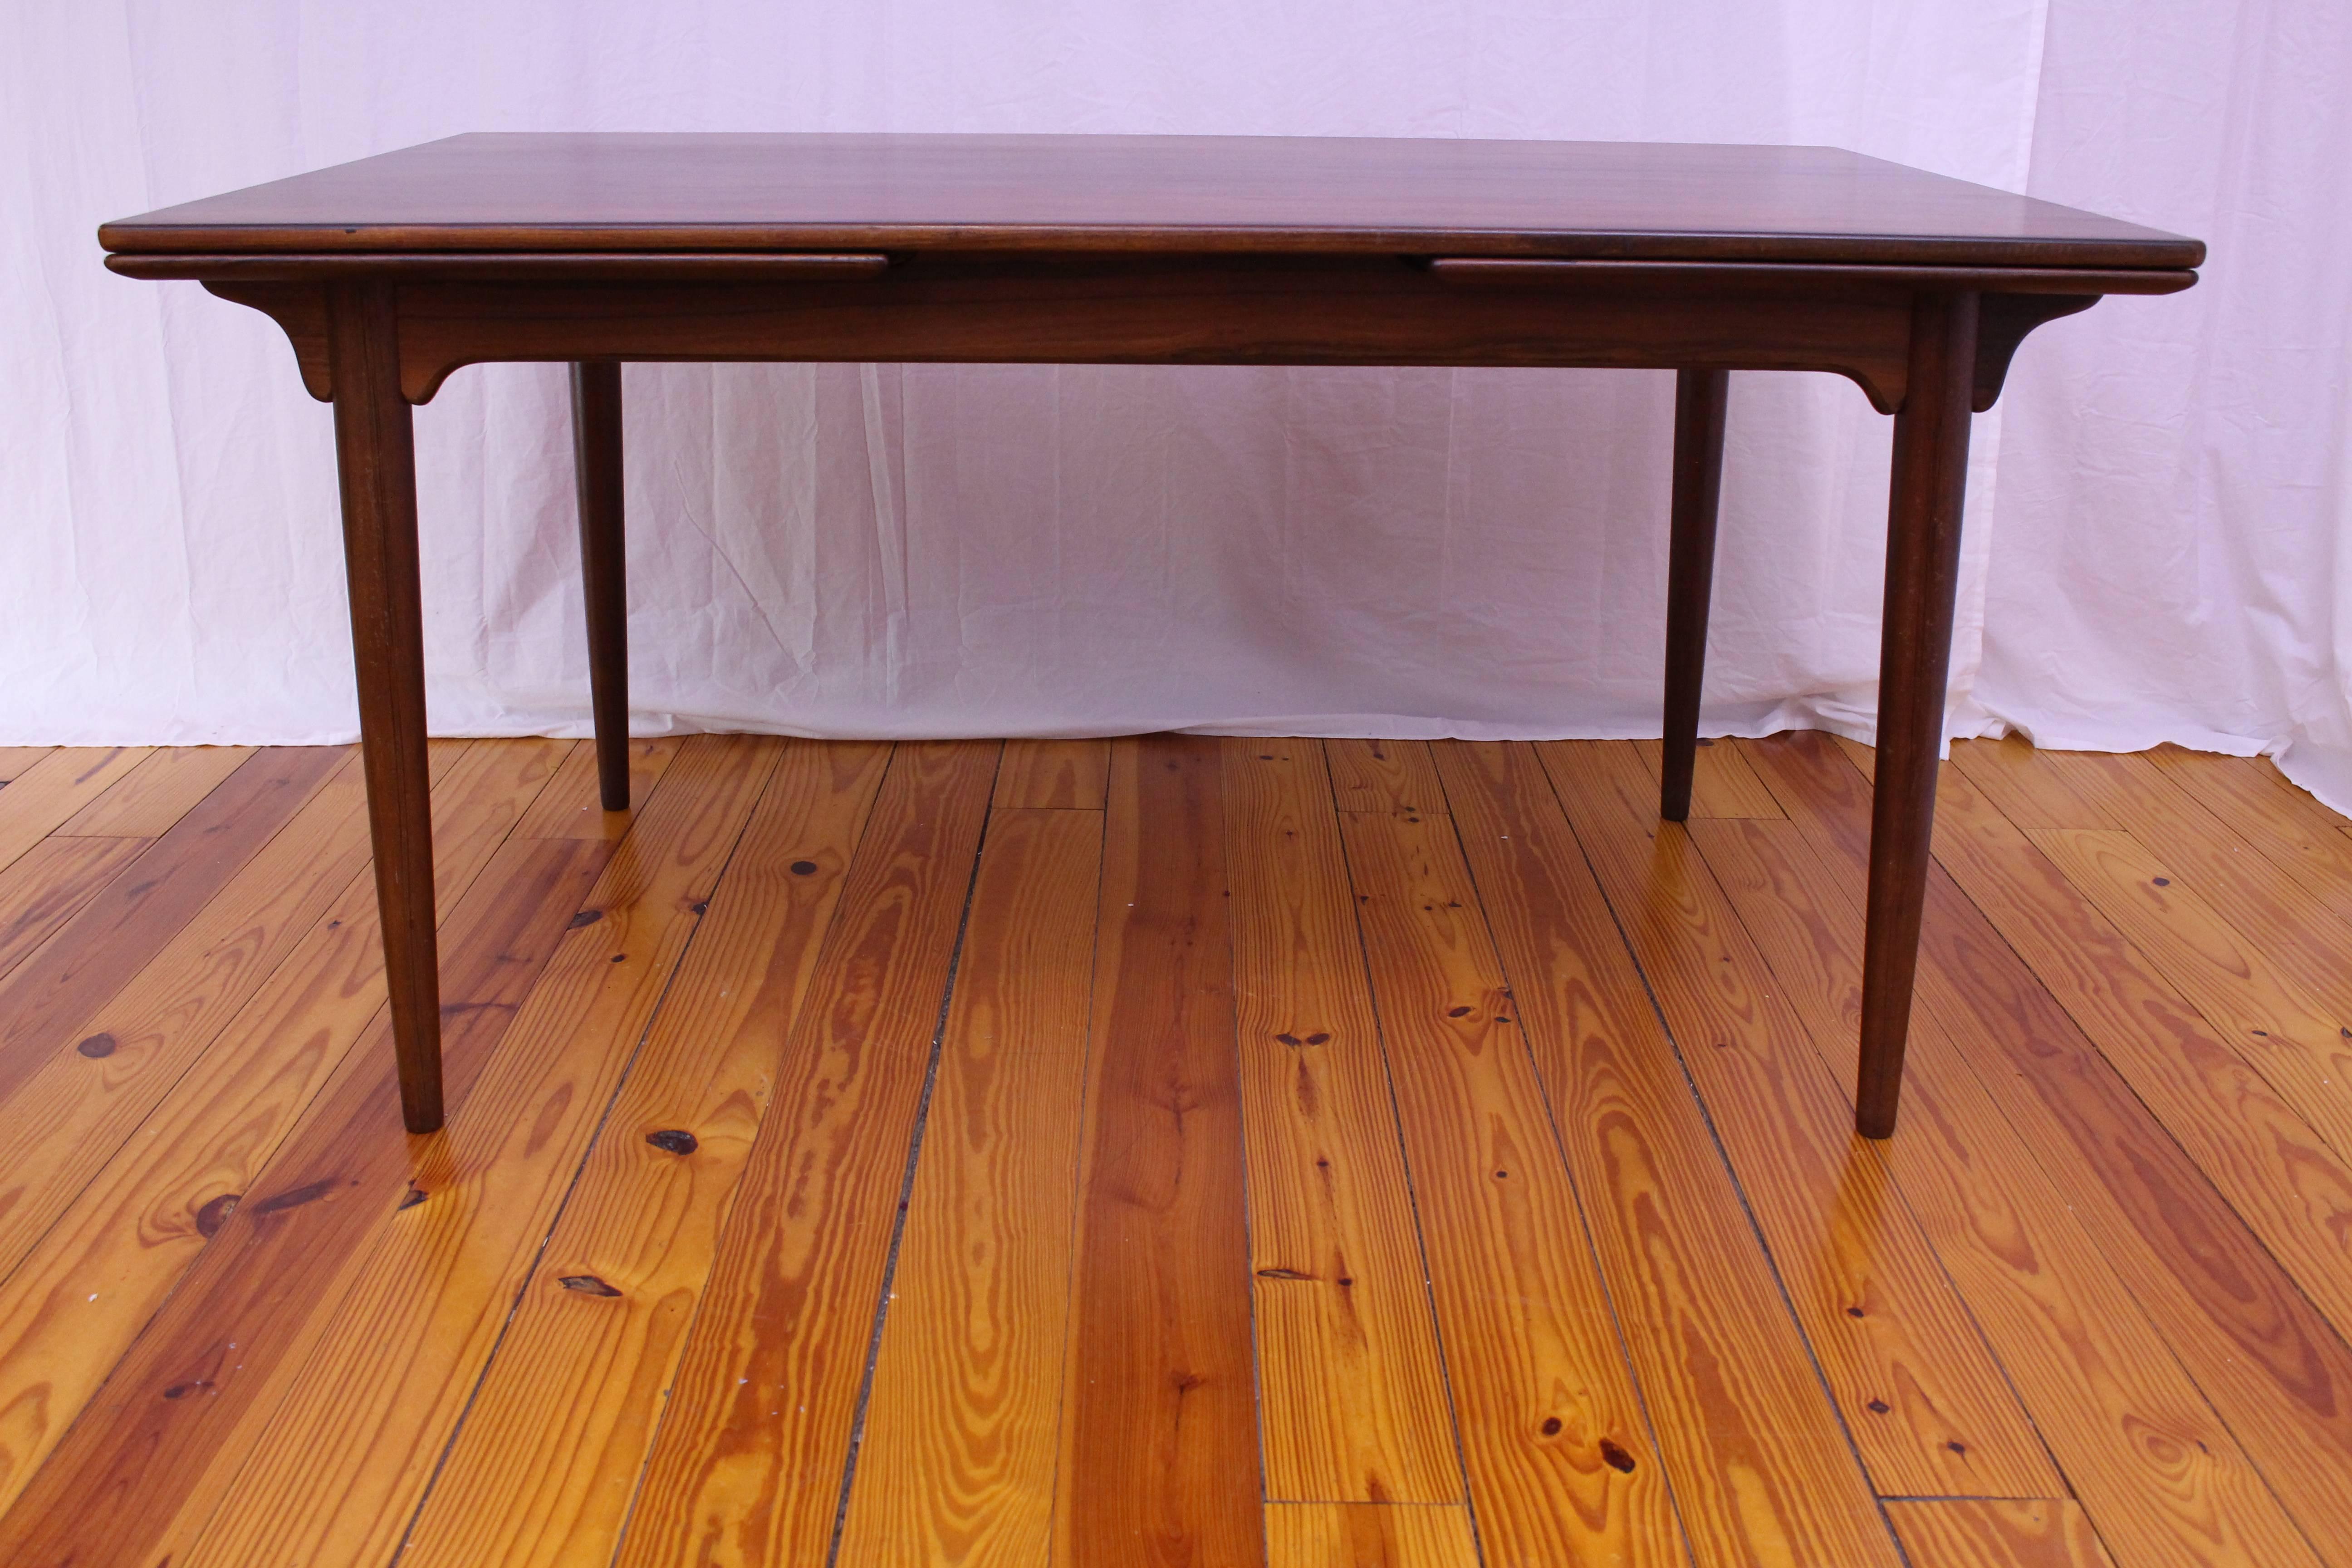 Beautiful rosewood rectangular table by Gunni Omann for Omann Jun. This table features two large pull-out leaves that self store underneath the top of the table. When the leaves are fully extended, the table length measures 100 inches. The dark,